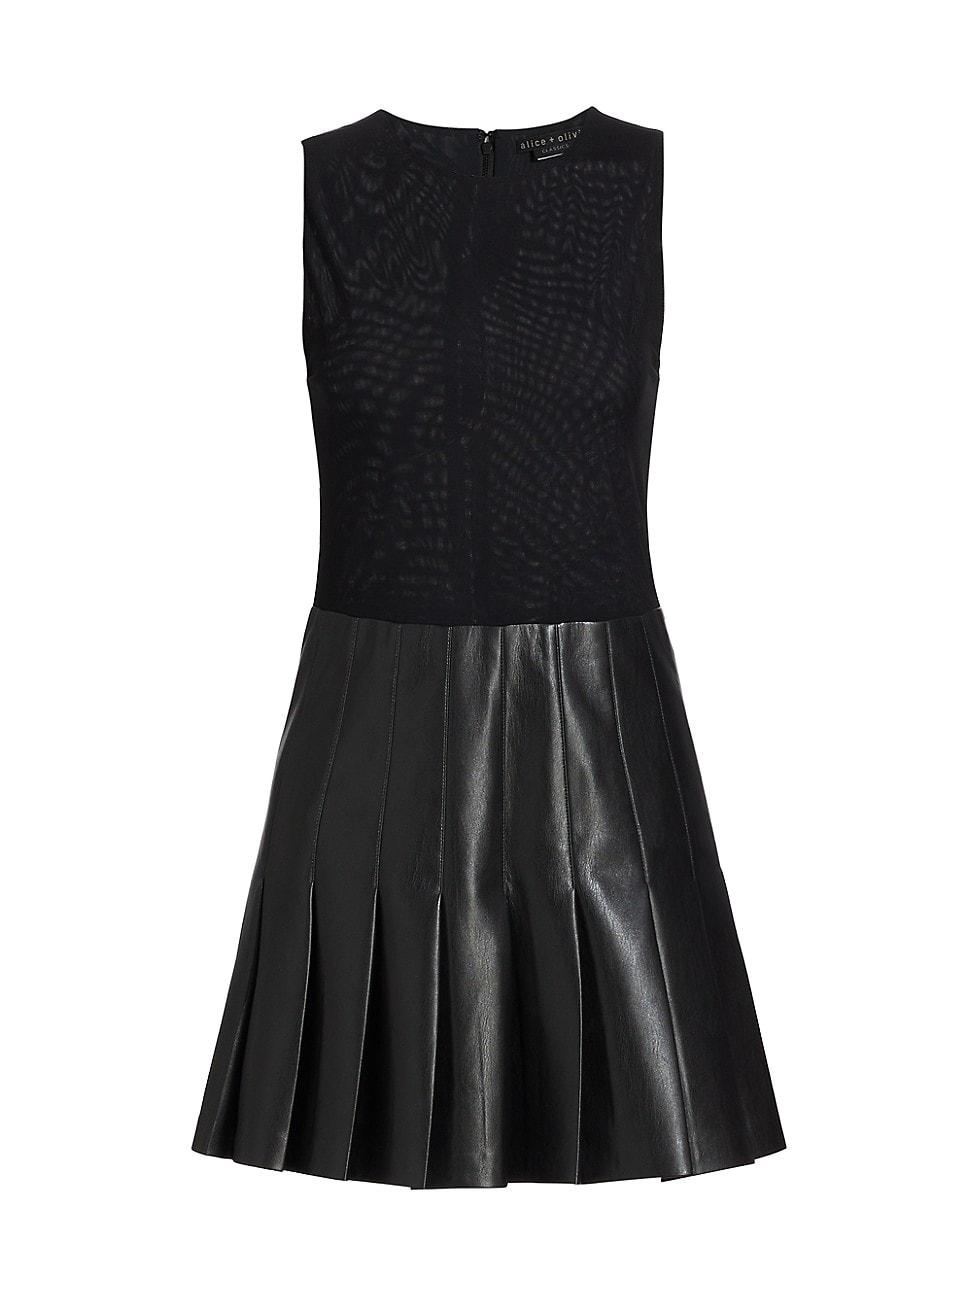 Alice + Olivia Chara Vegan Leather Fit-&-flare Dress in Black | Lyst